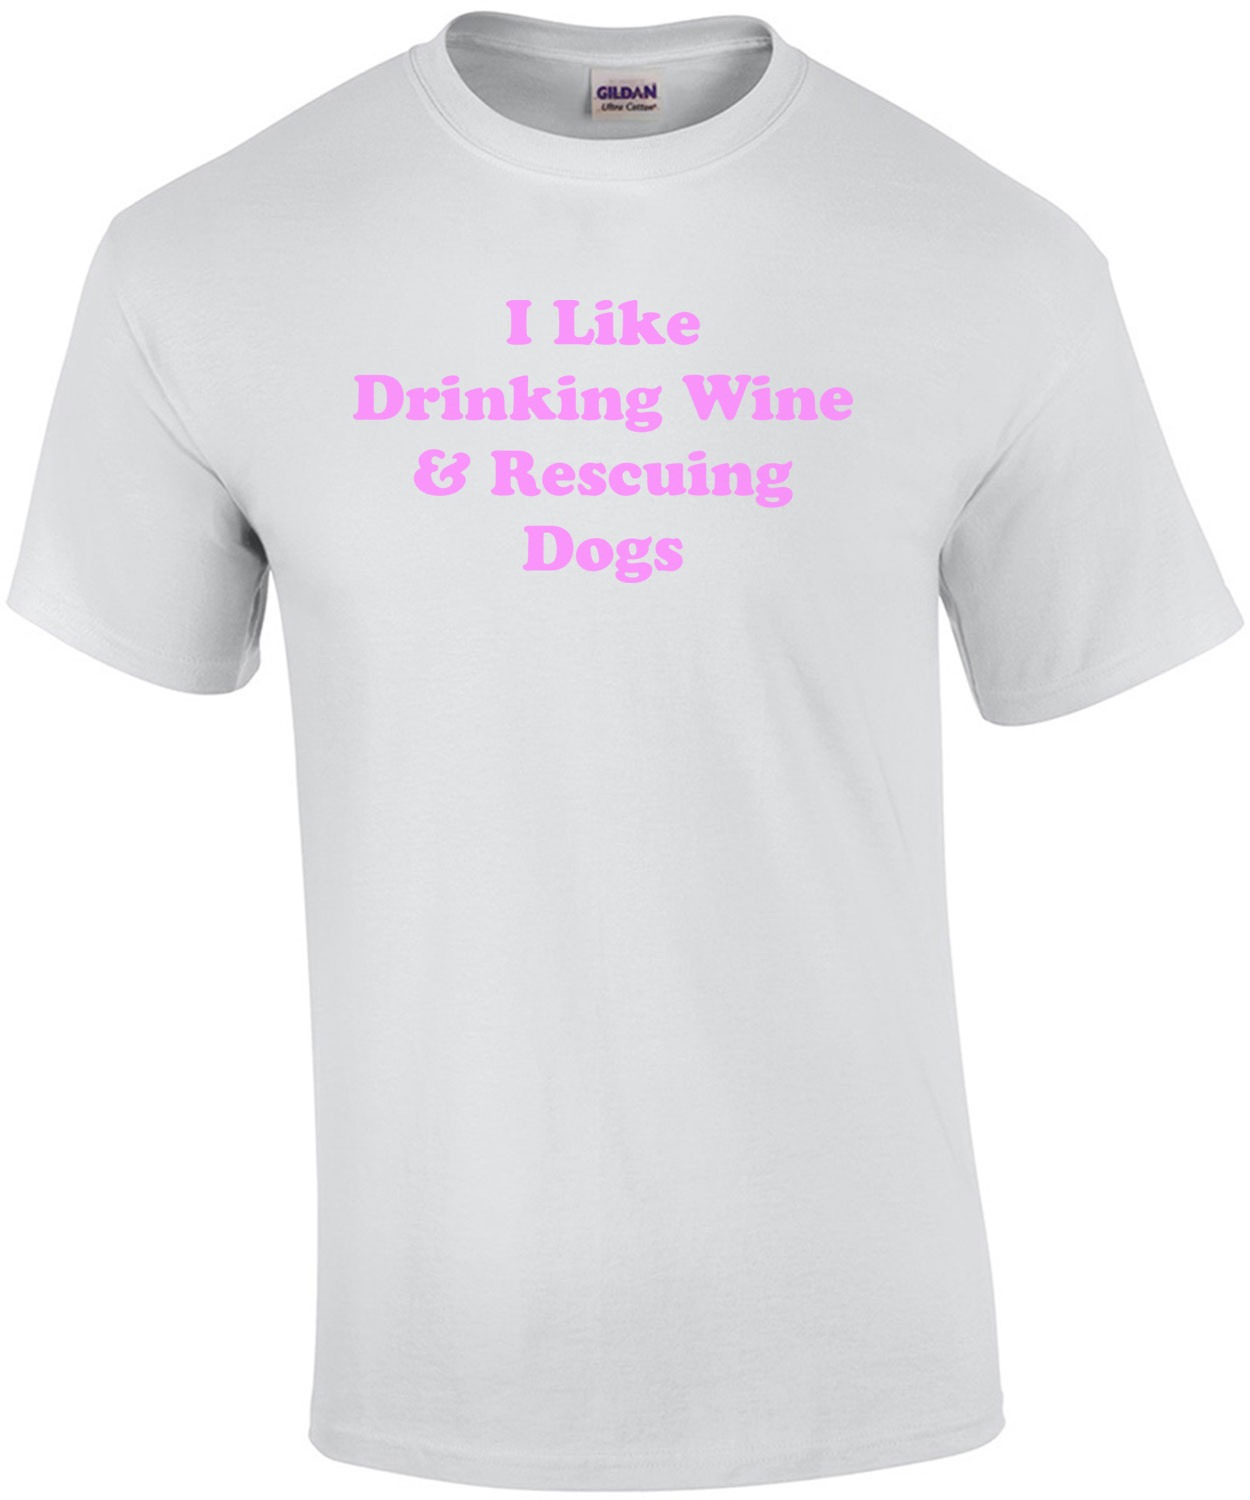 I Like Drinking Wine & Rescuing Dogs 2